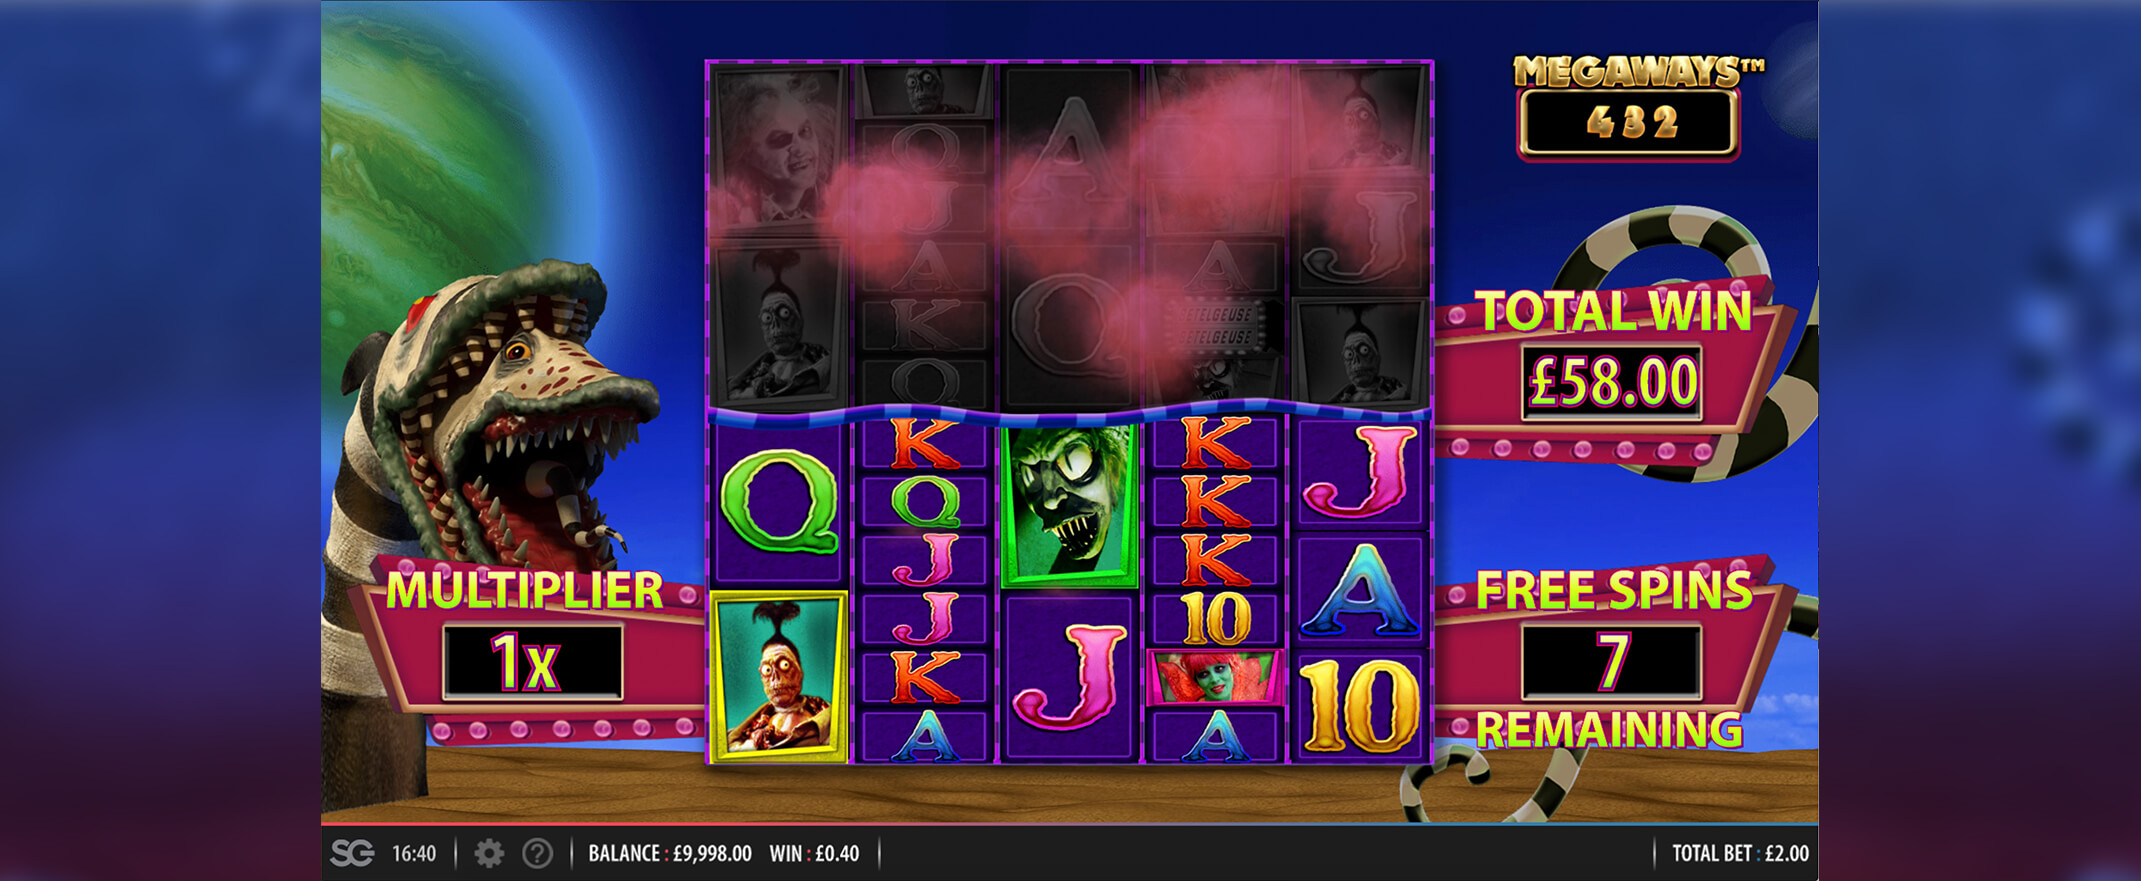 Beetlejuice Mighty Ways Slot Review, image of the reels and symbols